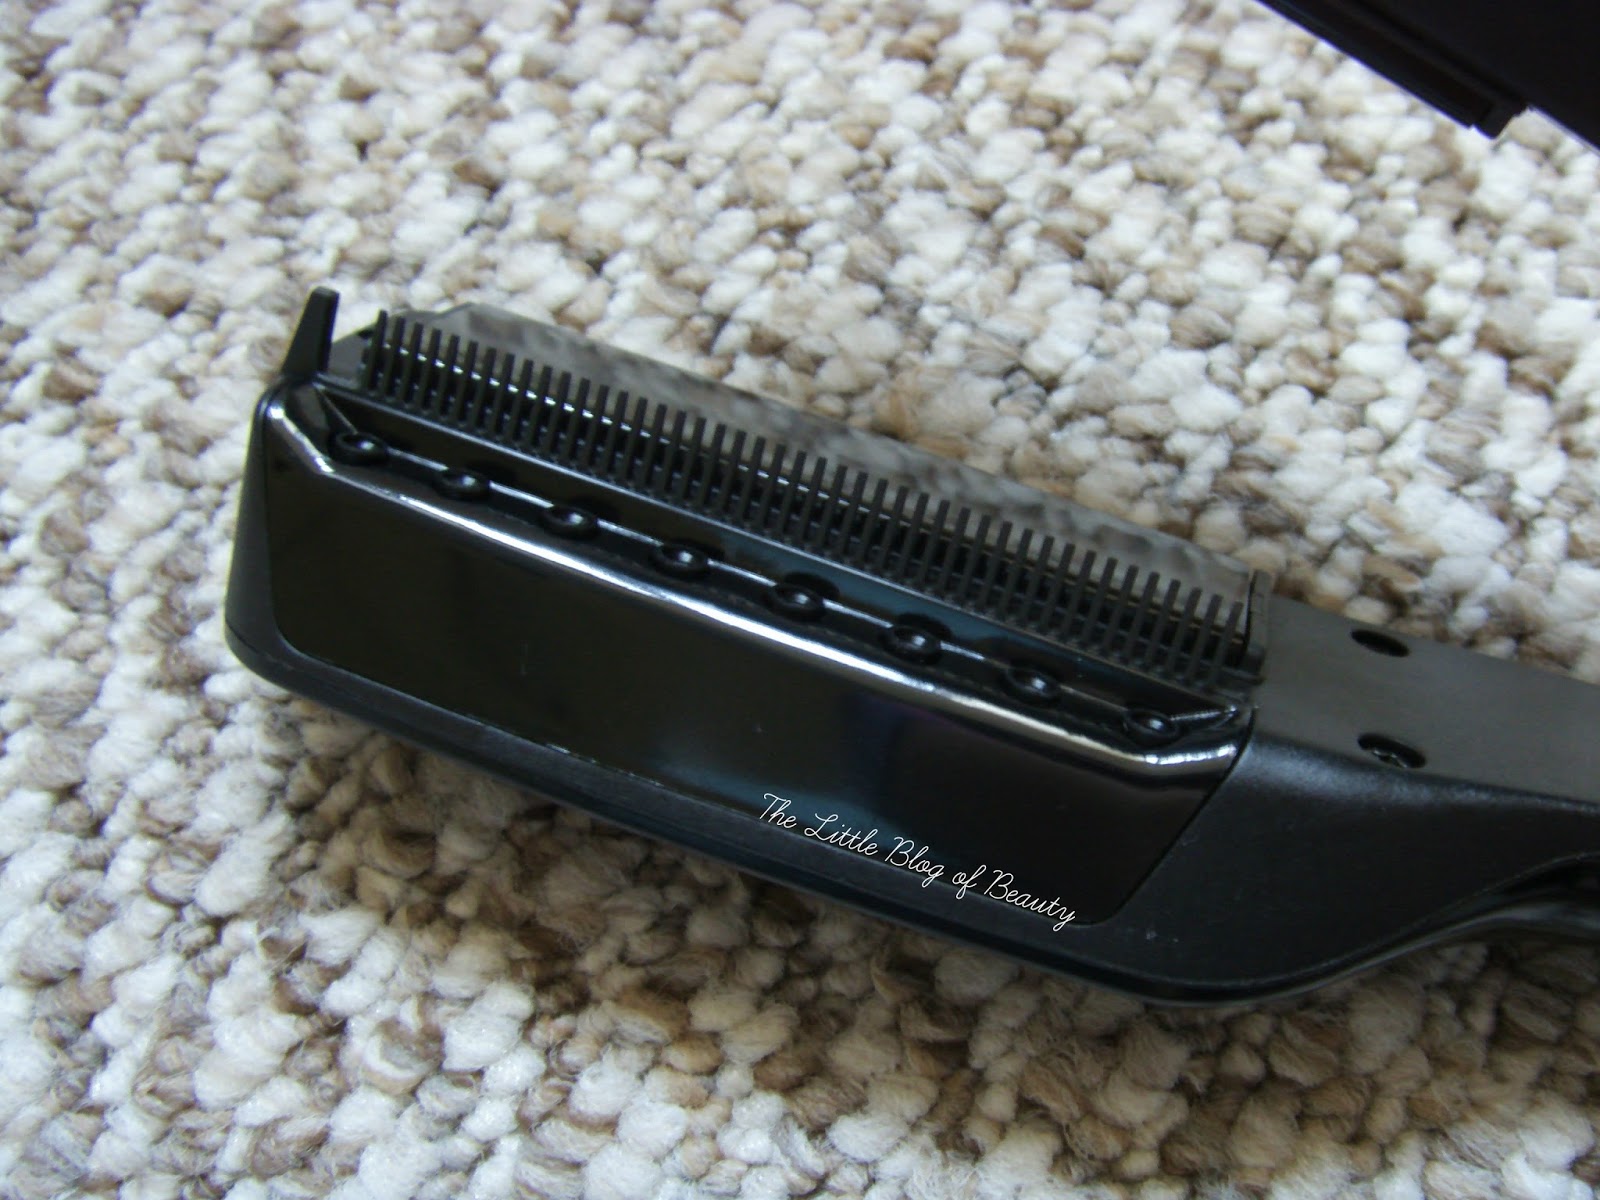 L'Oreal Professional Crystal Temptation Steampod straighteners